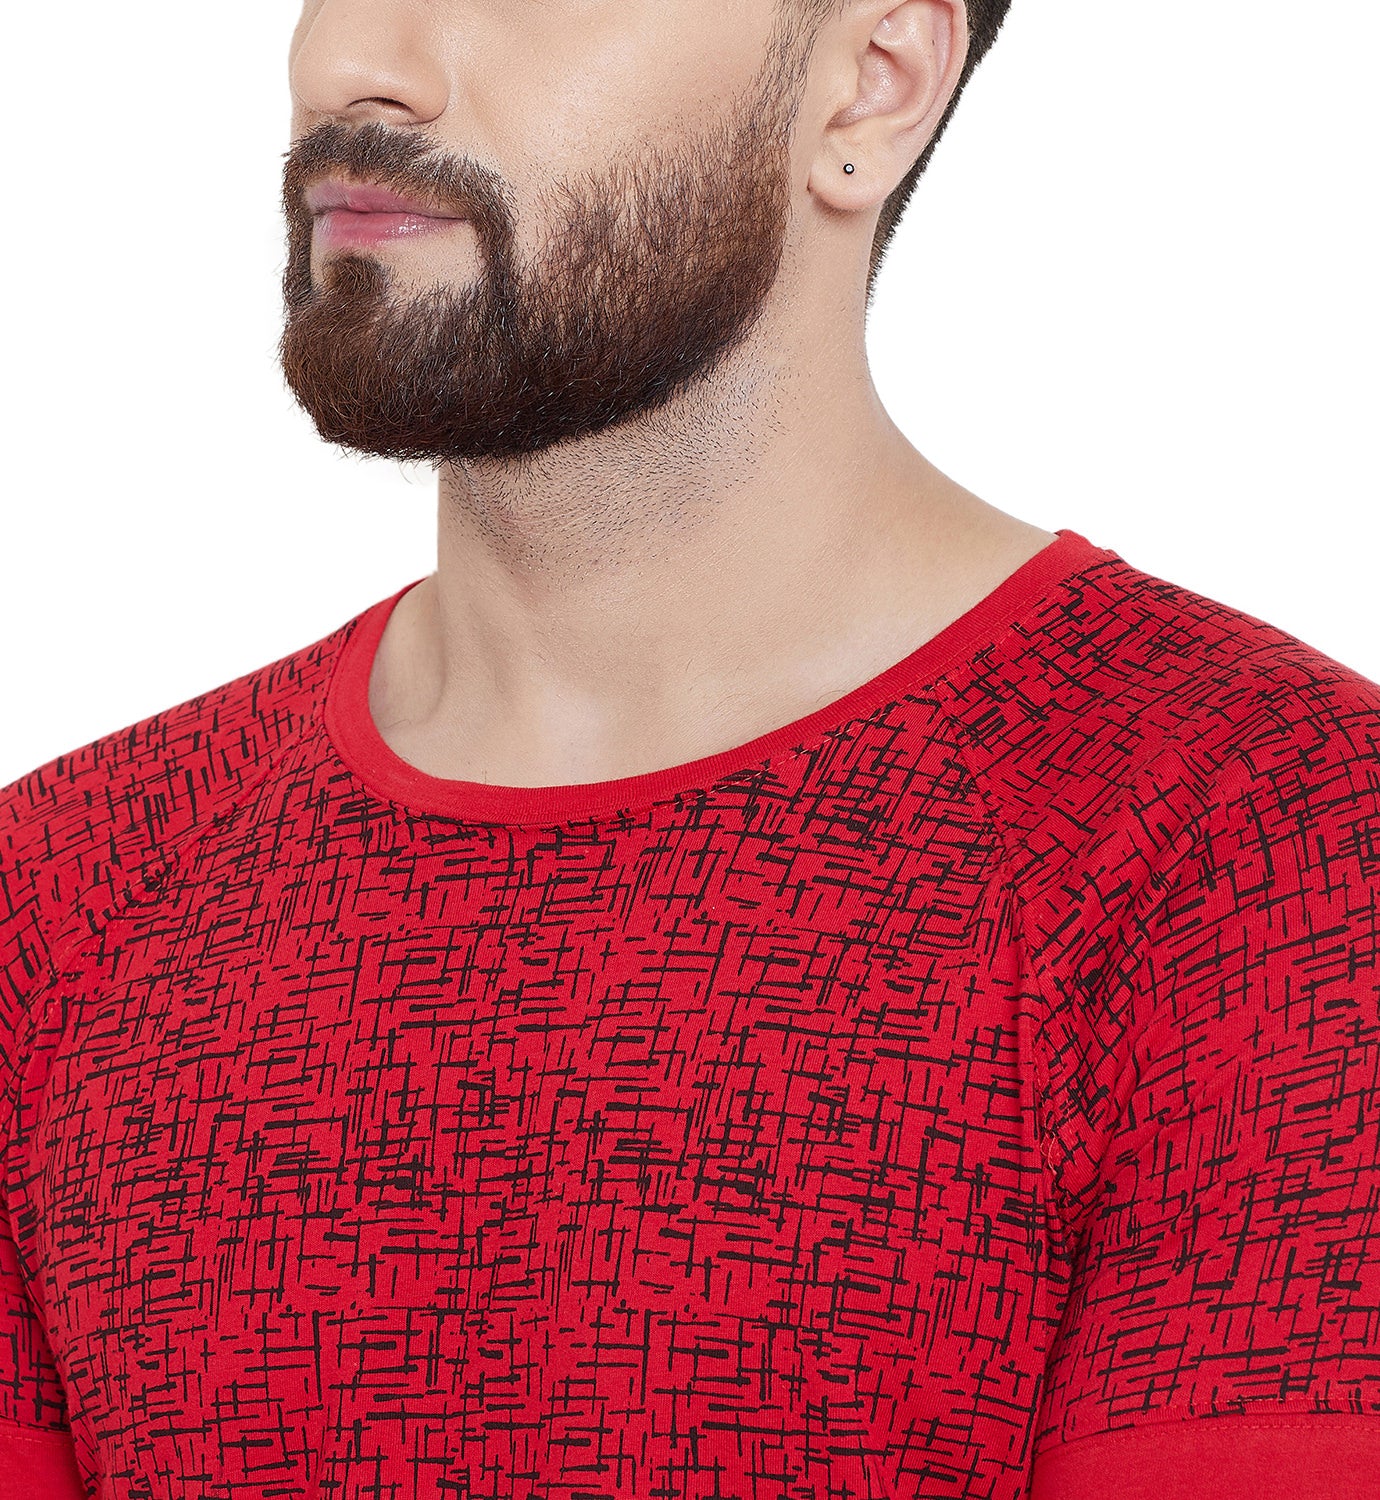 Red Printed Round Neck Full Sleeves T-Shirt